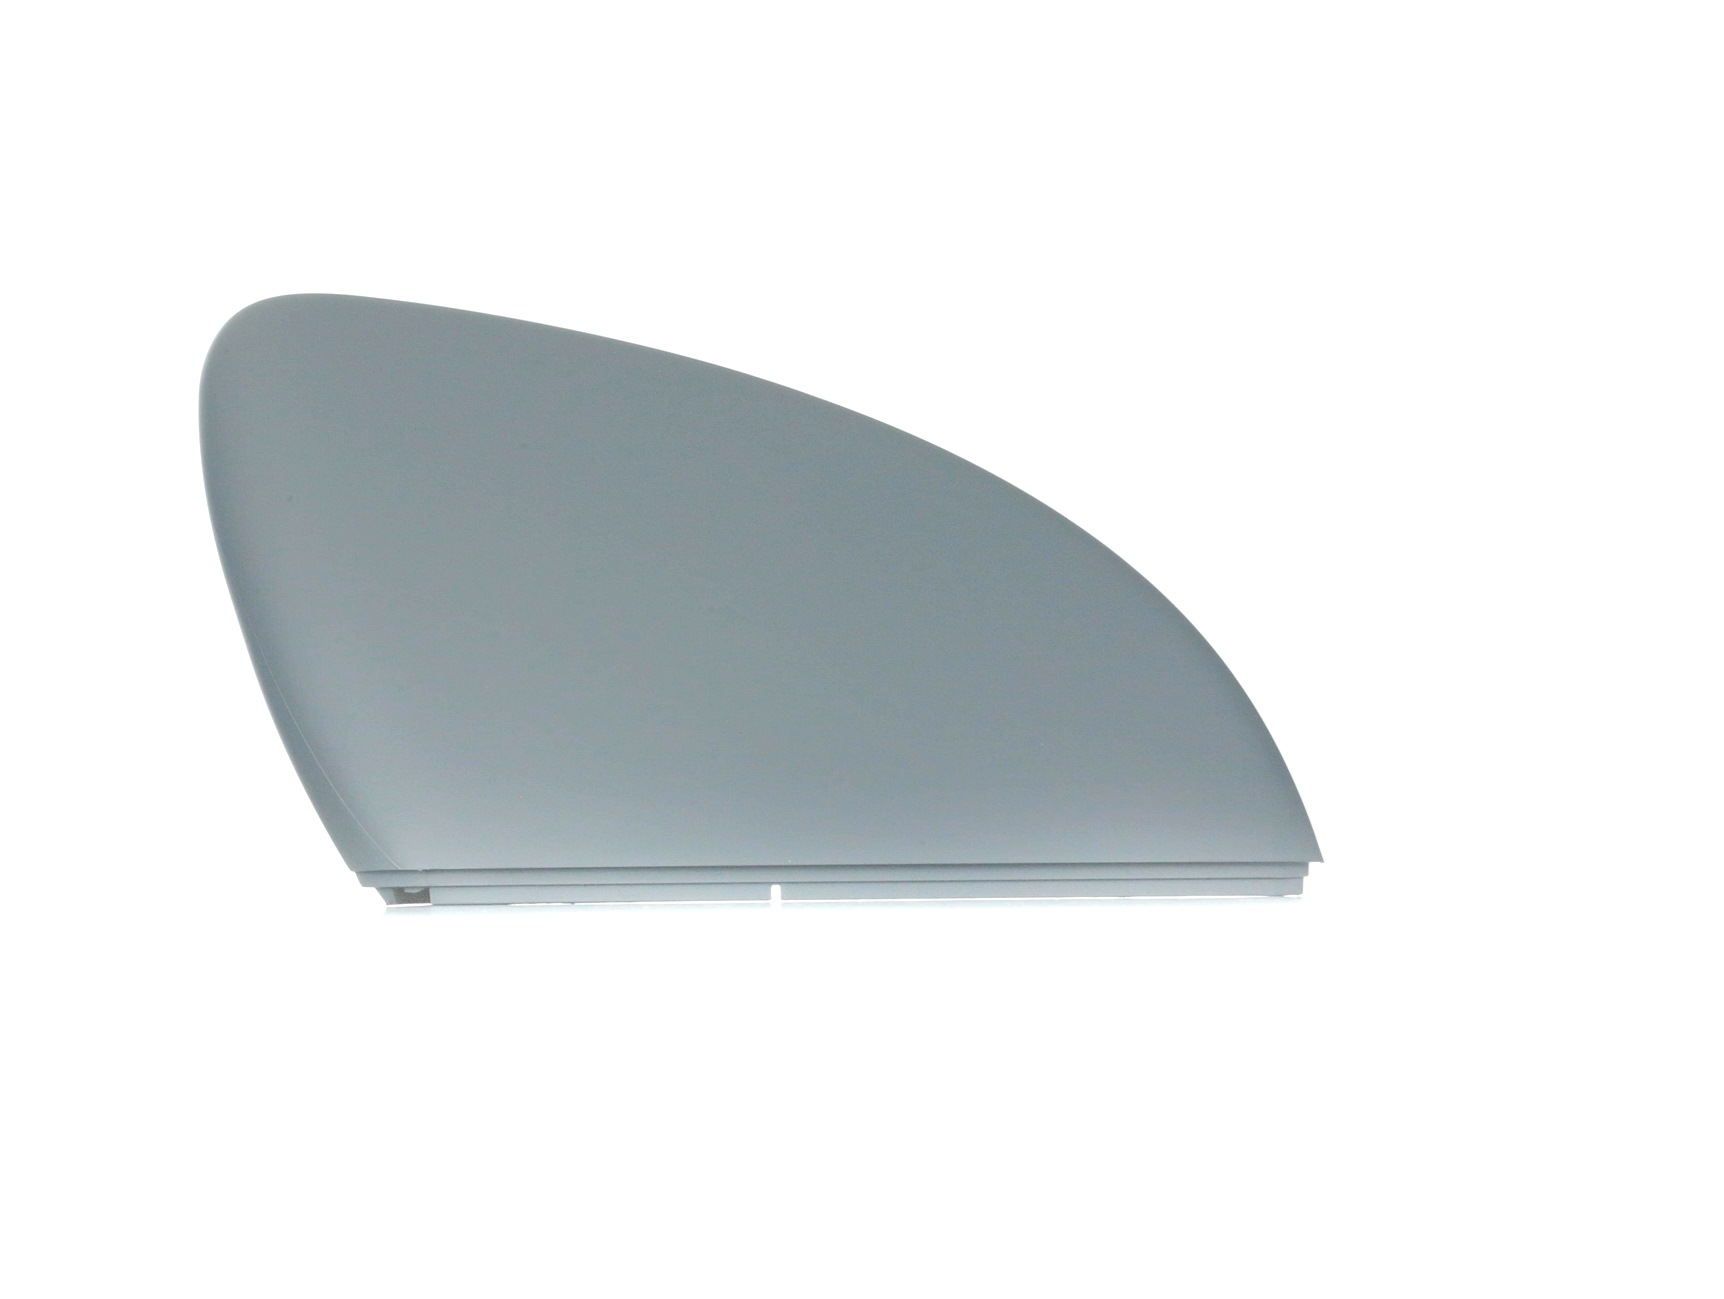 Volkswagen TOURAN Cover, outside mirror TYC 337-0243-2 cheap